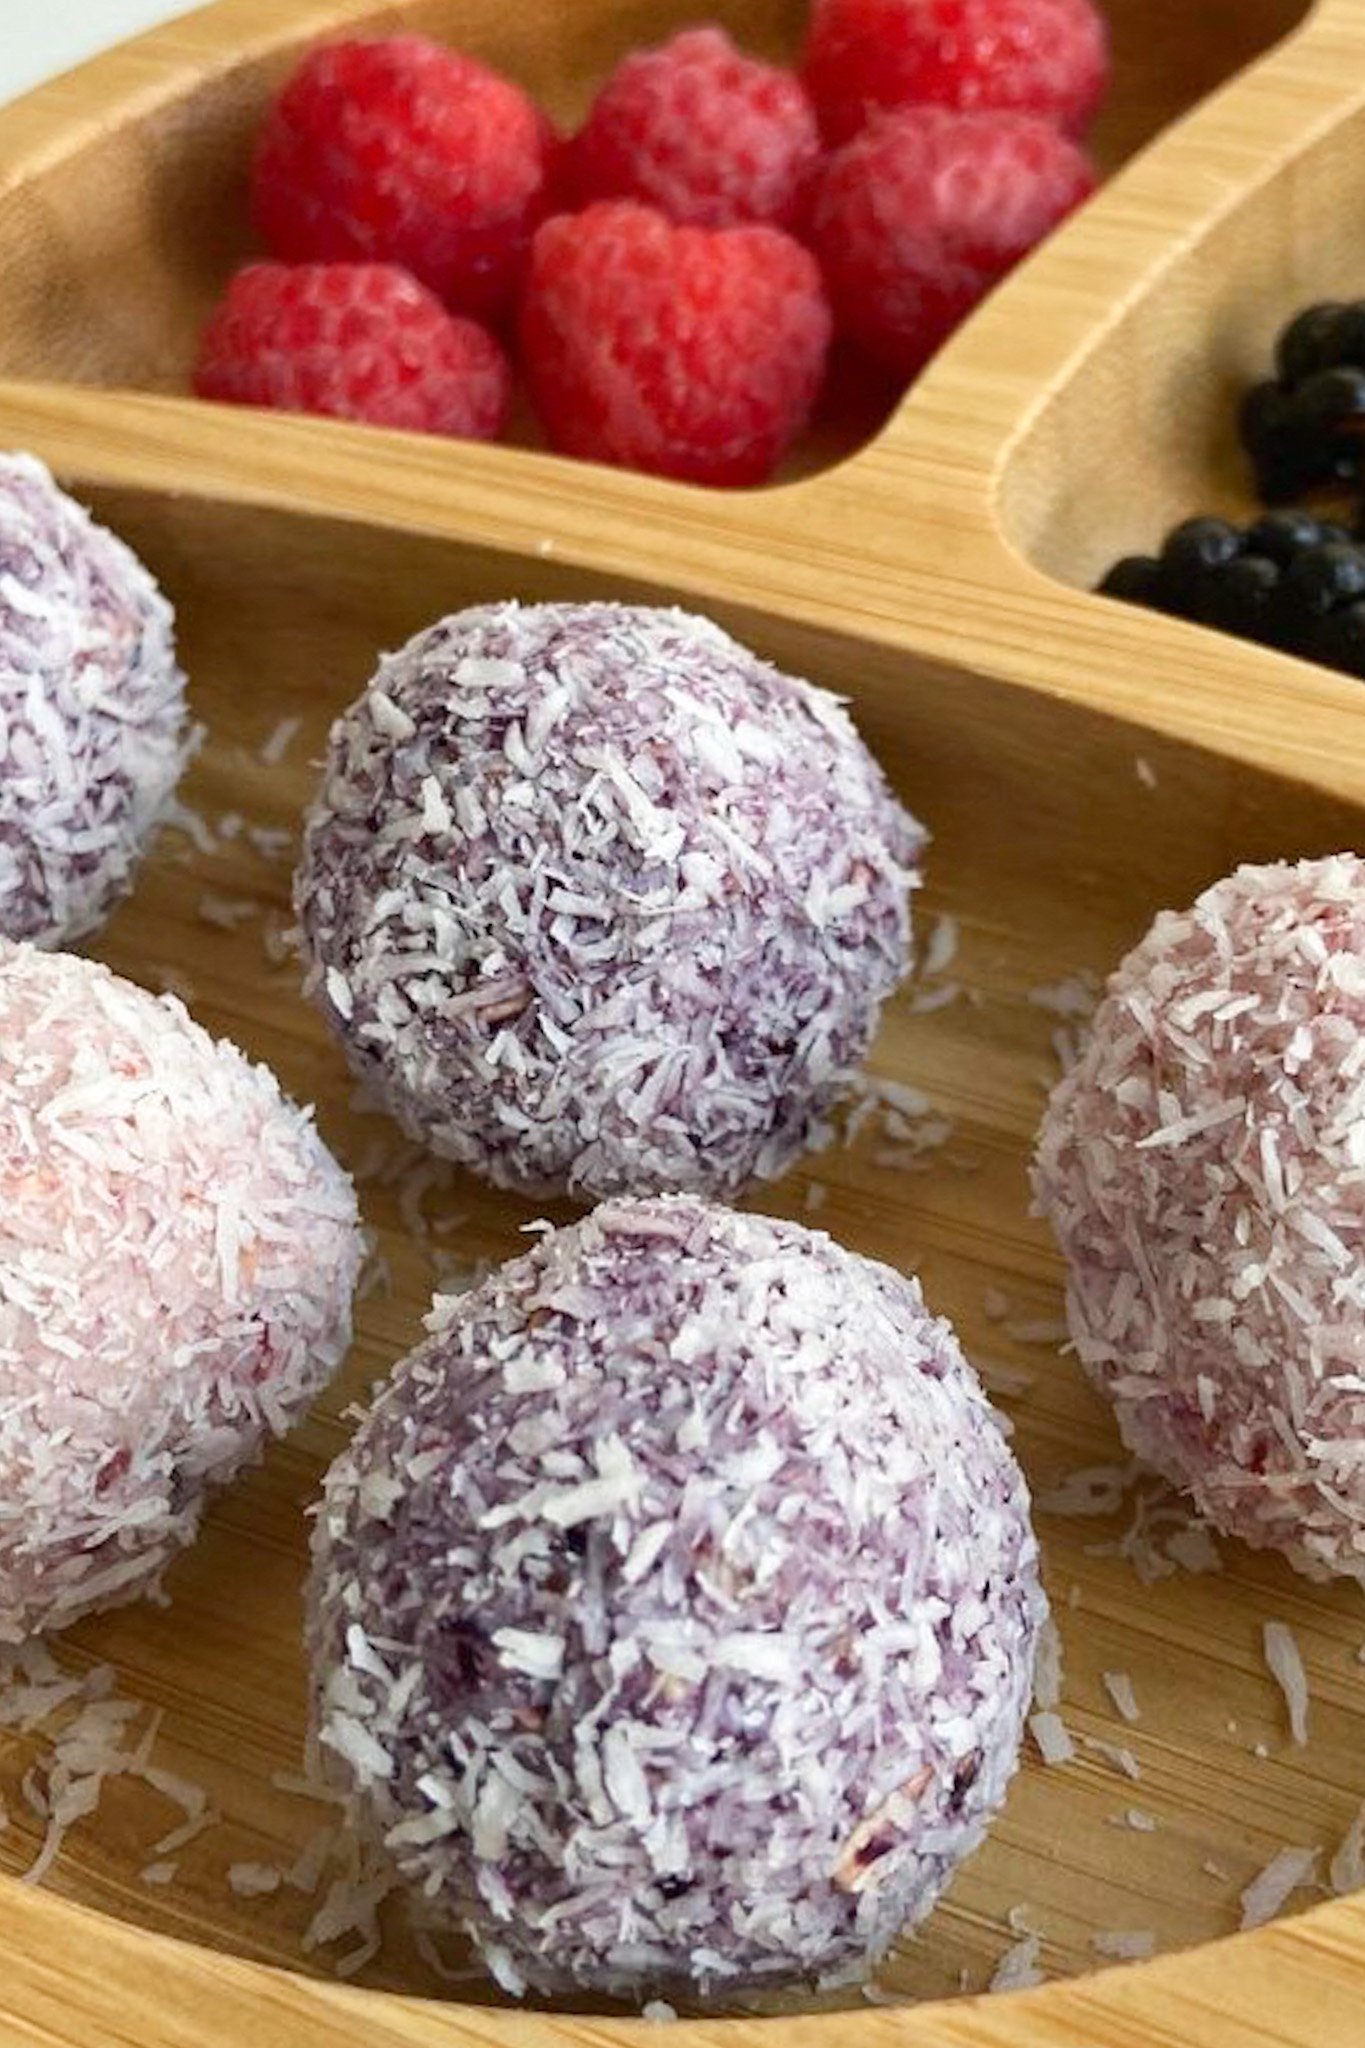 Berry bliss balls served with raspberries and blackberries